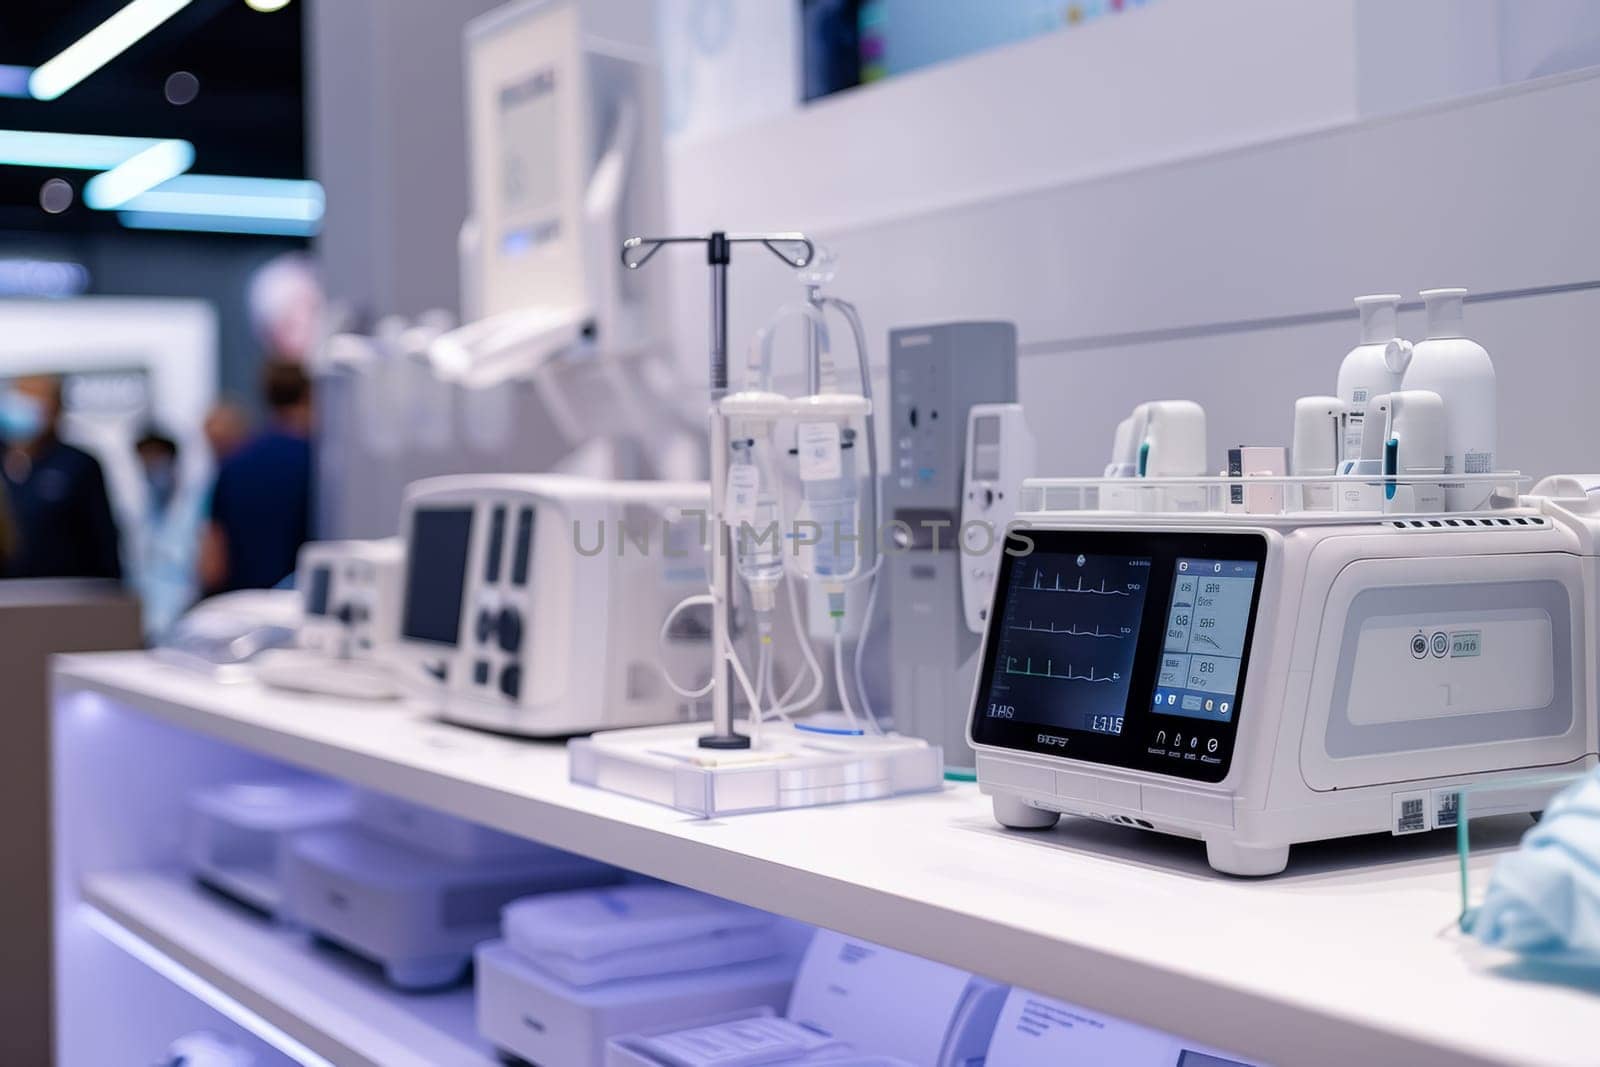 Advanced Medical Equipment Display at Expo by andreyz